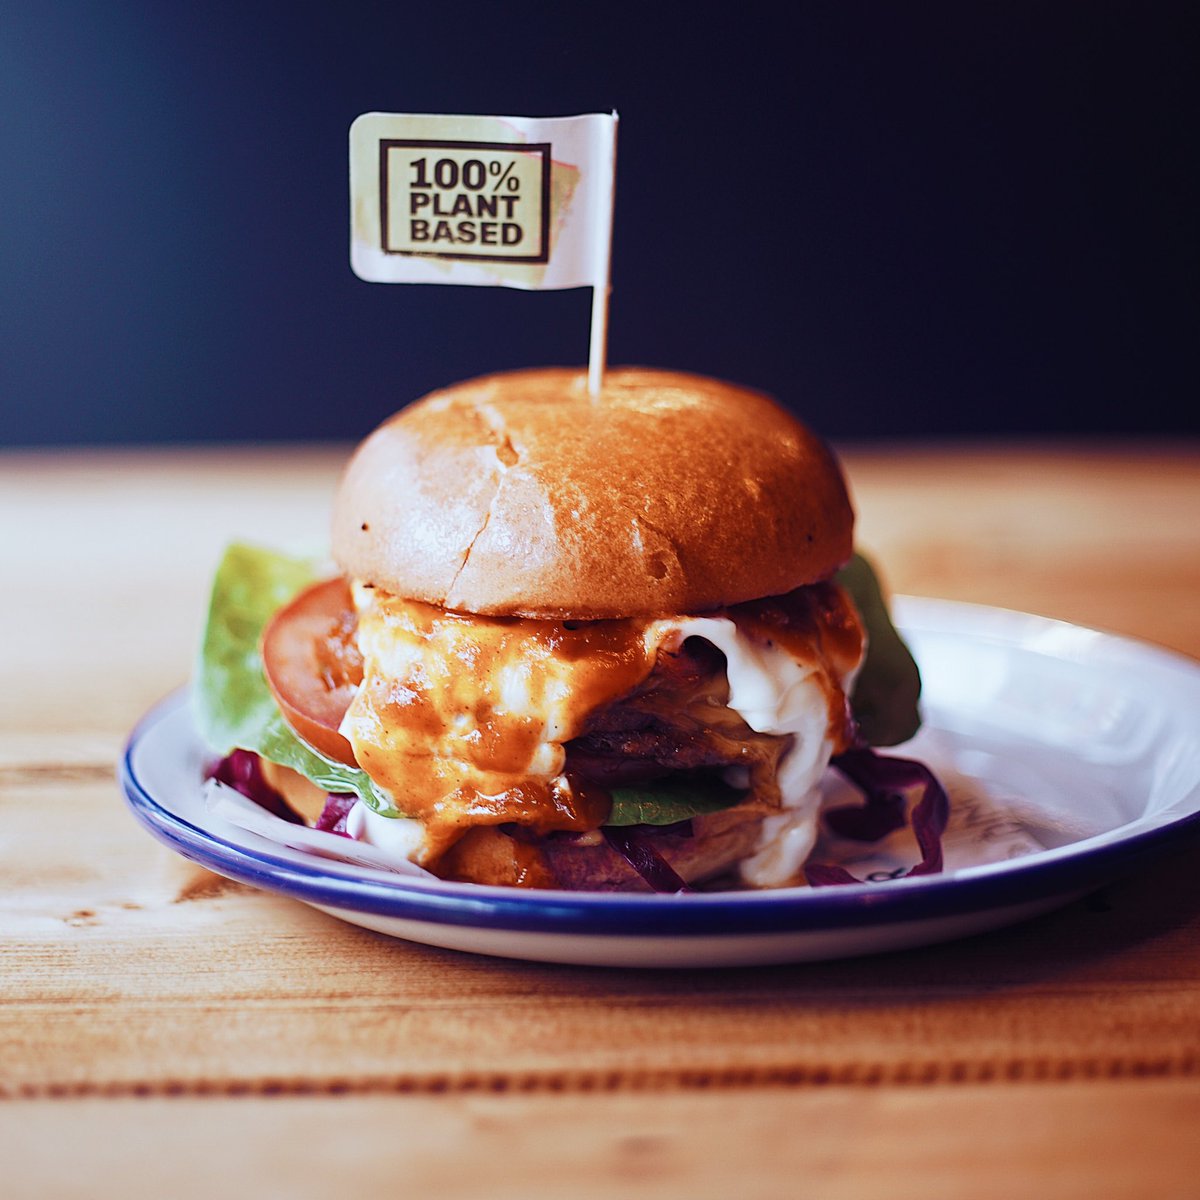 We heard it’s #nationalburgerday, so here’s our @movingmountainsfoods double beef patty burger, with extra garlic mayo, because we just fancied being a bit extra 🔥 #vegan #unitydiner